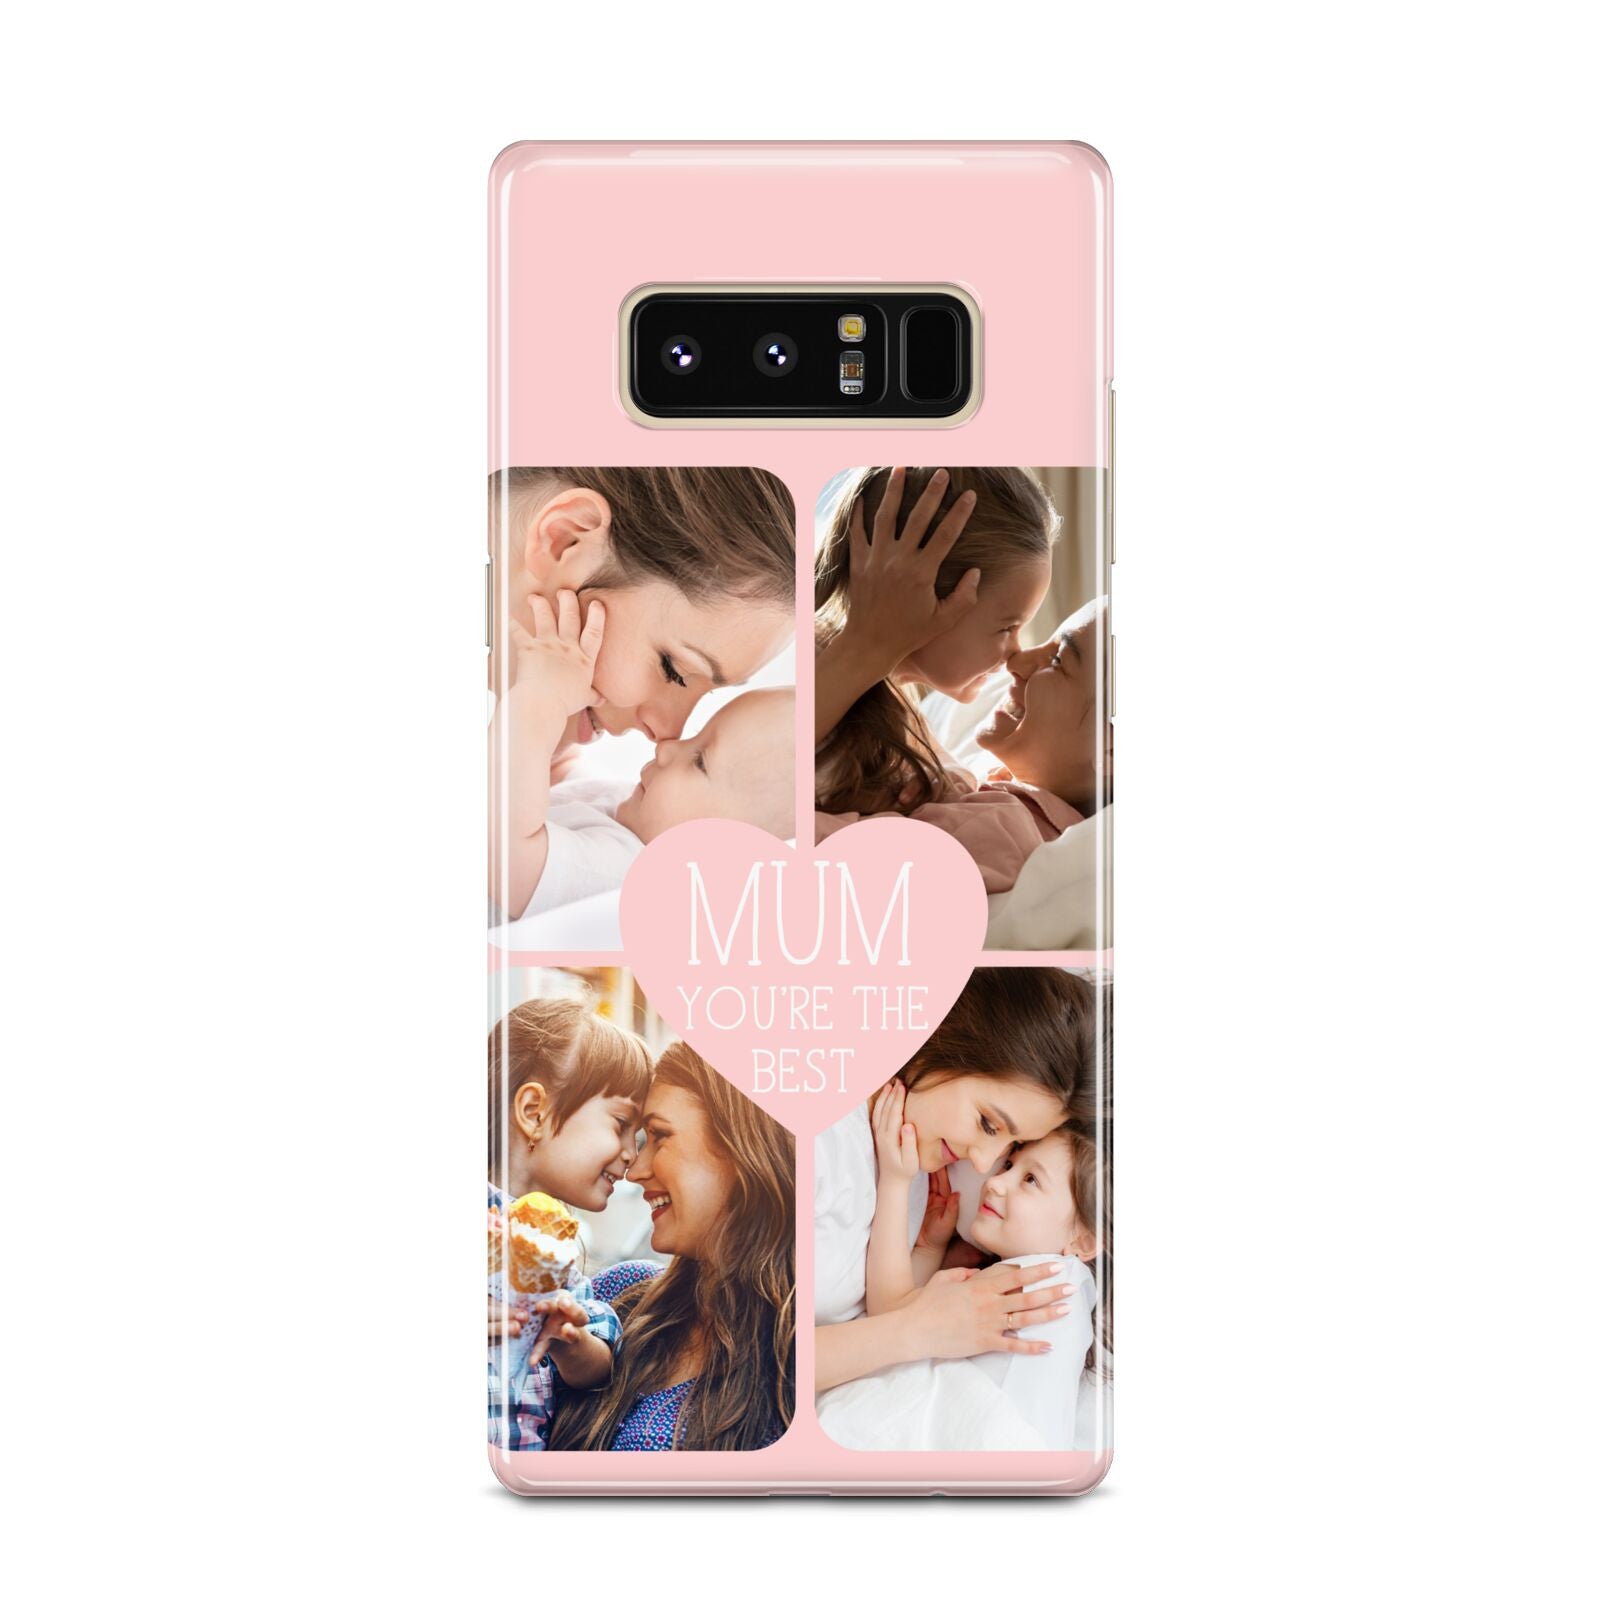 Mothers Day Four Photo Upload Samsung Galaxy Note 8 Case